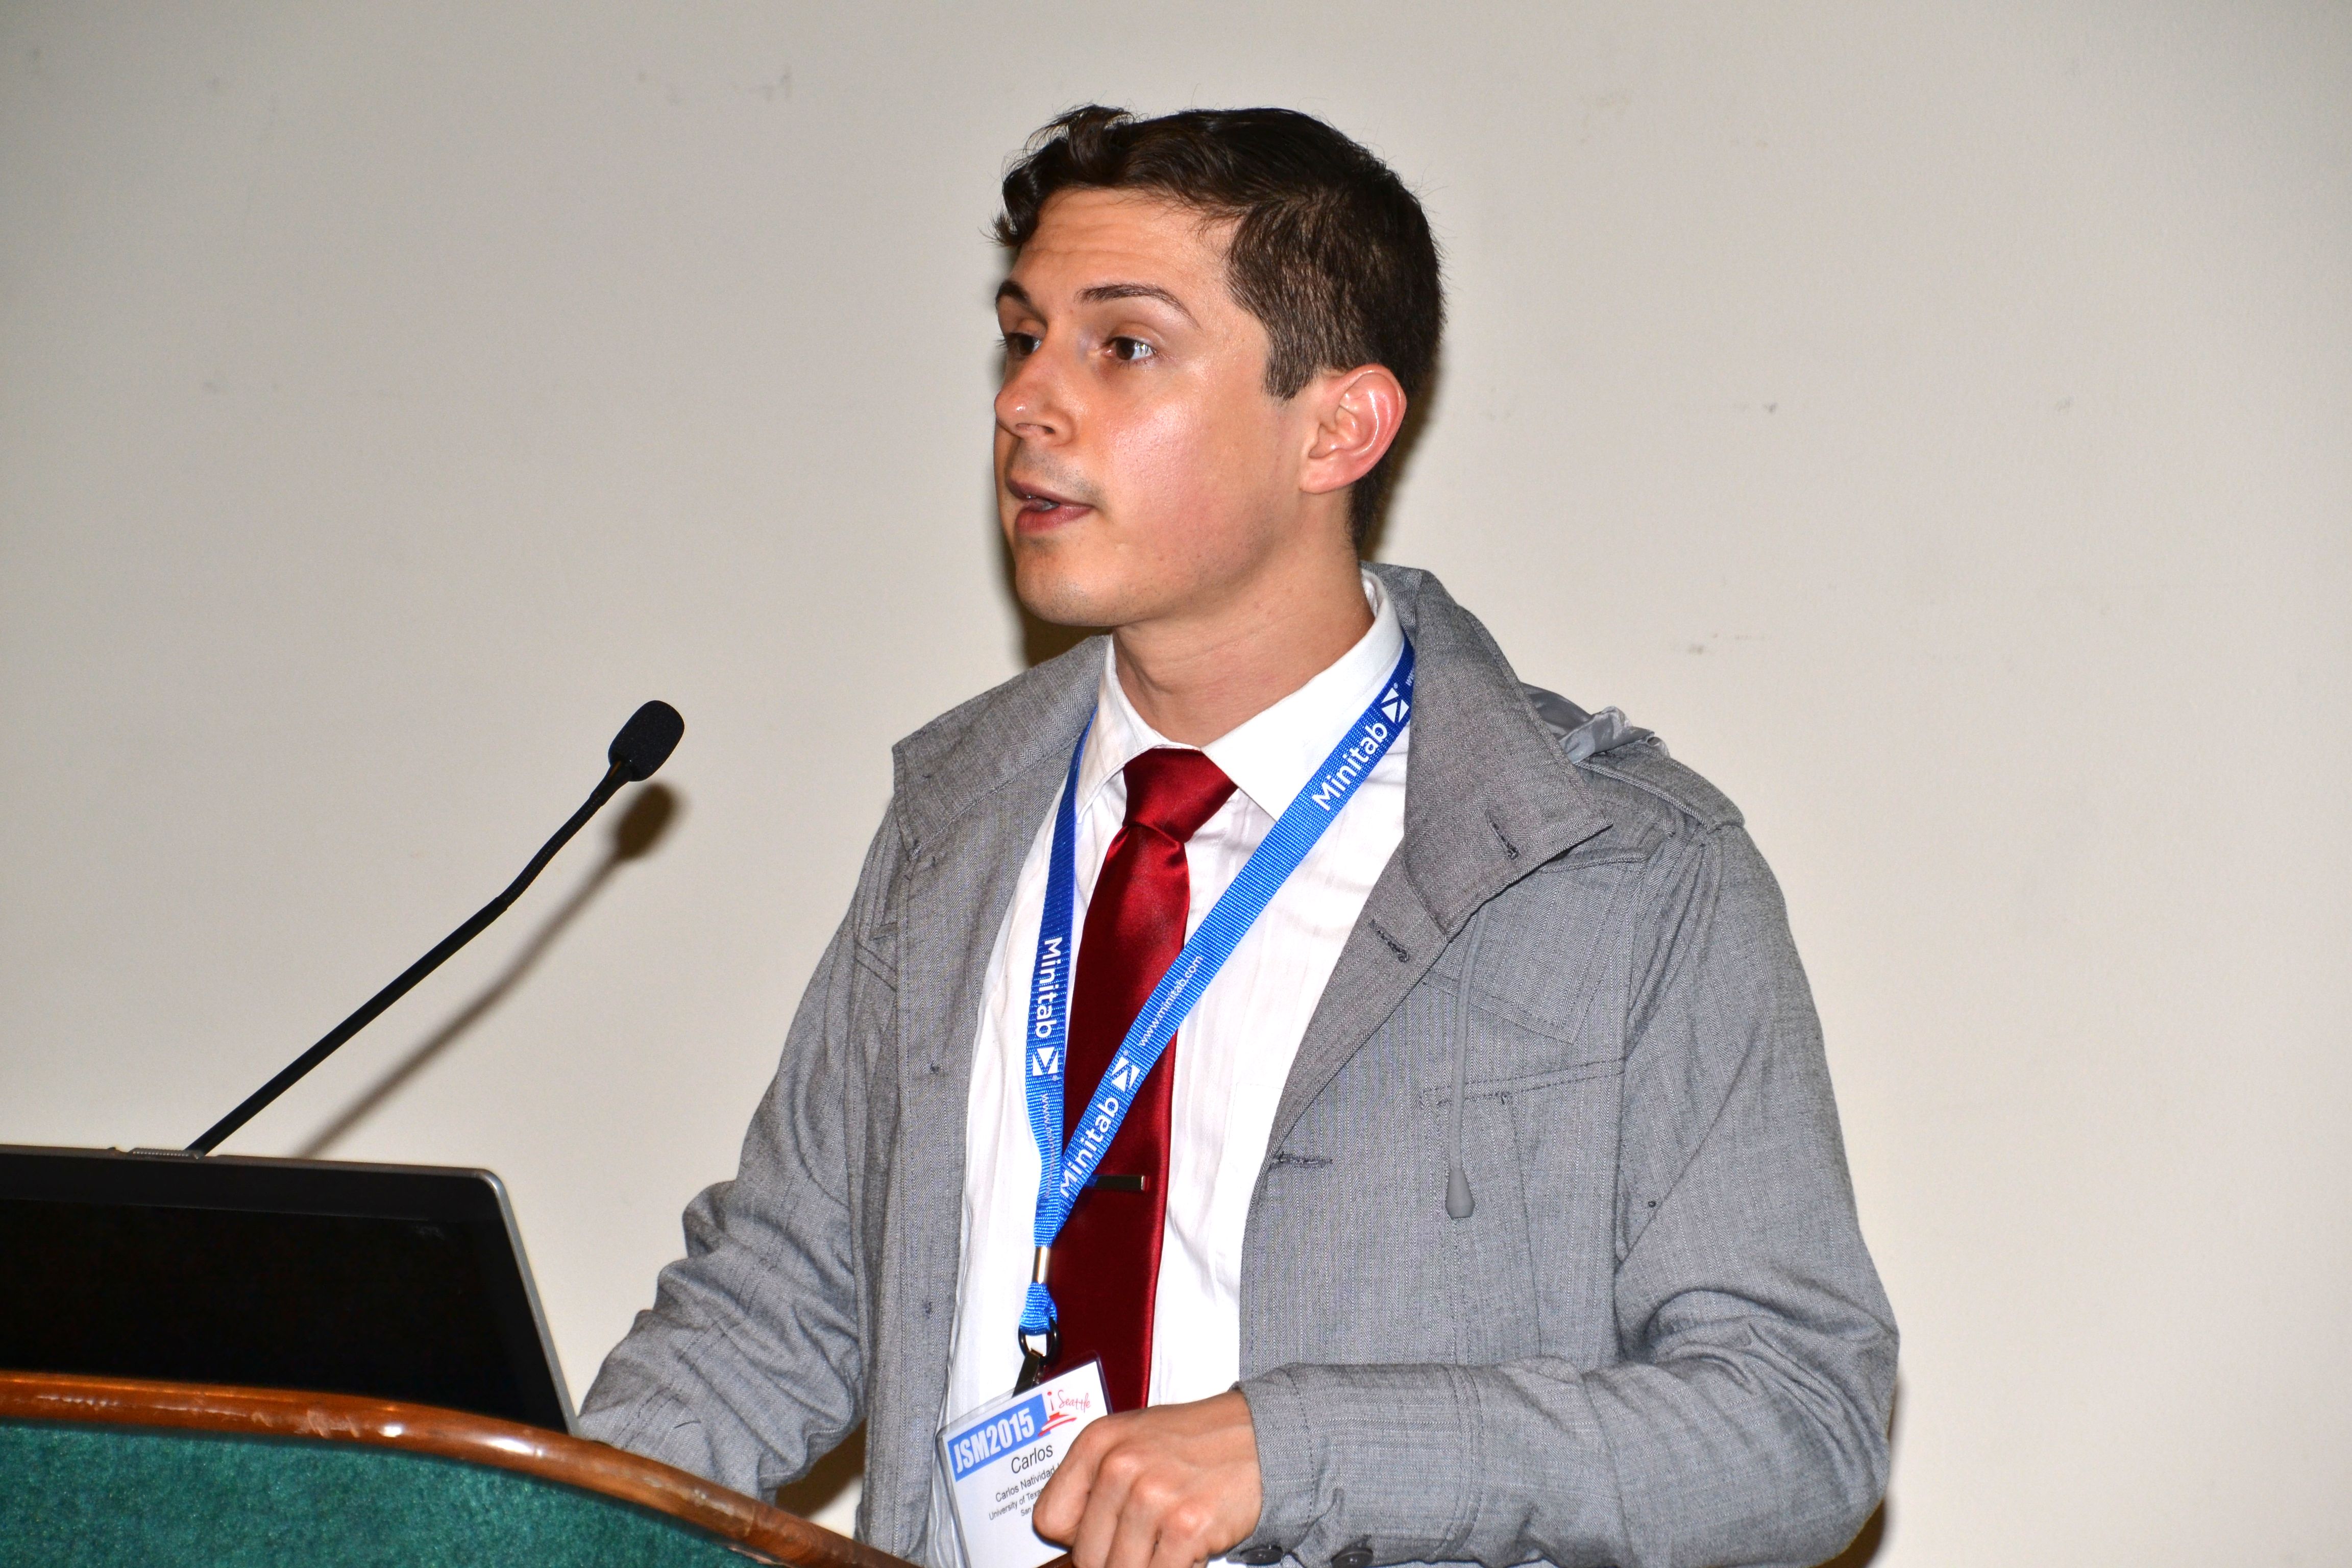 Carlos Natividad-Licon of The University of Texas at San Antonio speaks during the speed session Topics in Imaging Biostatistics, Computing, and Modeling: Classification of Greek Wines According to Geographic Region. 